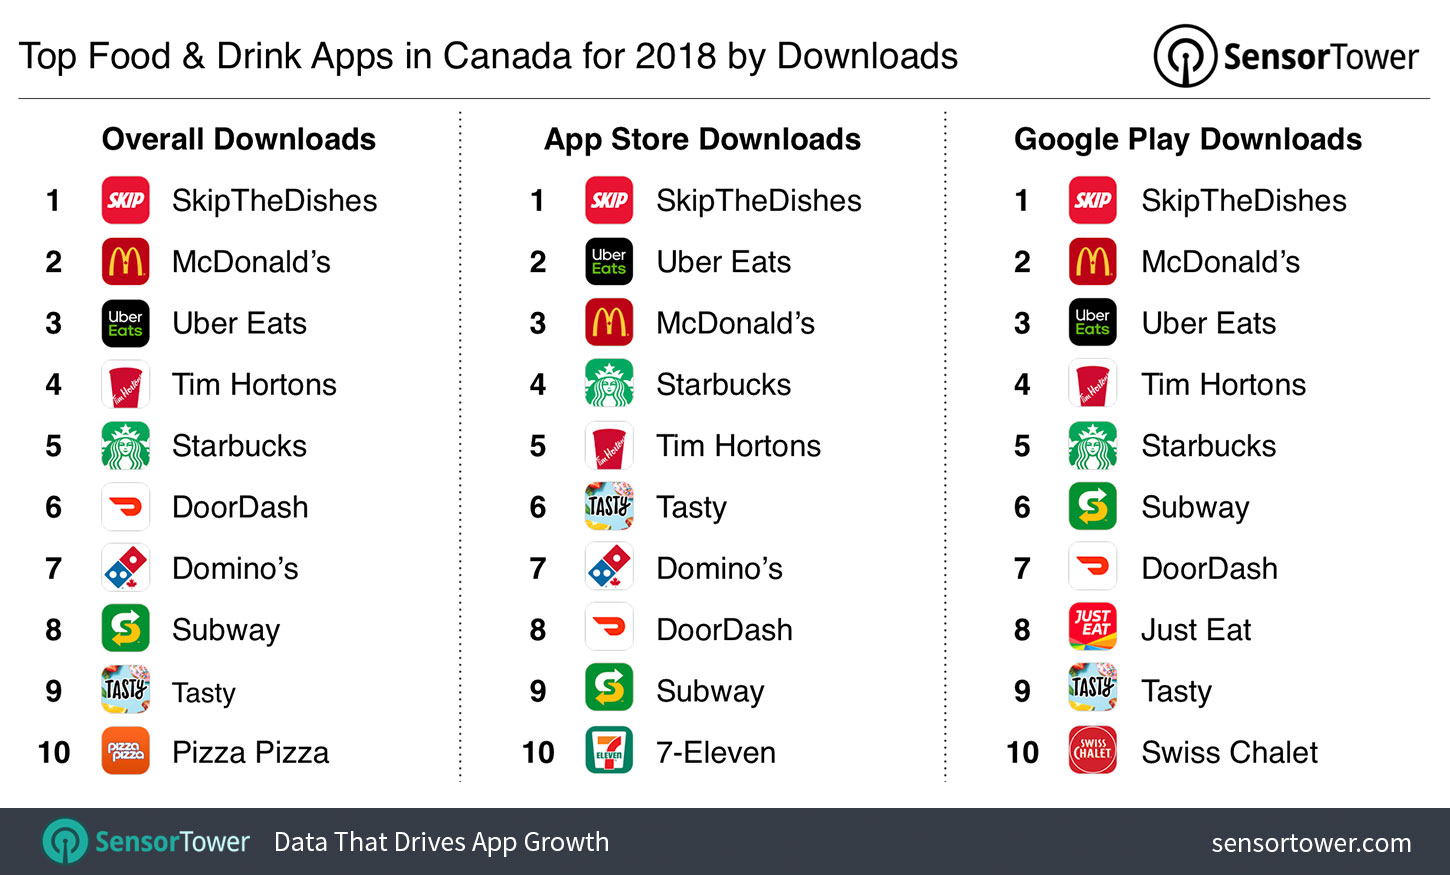 Top Food & Drink Apps in Canada for 2018 by Downloads